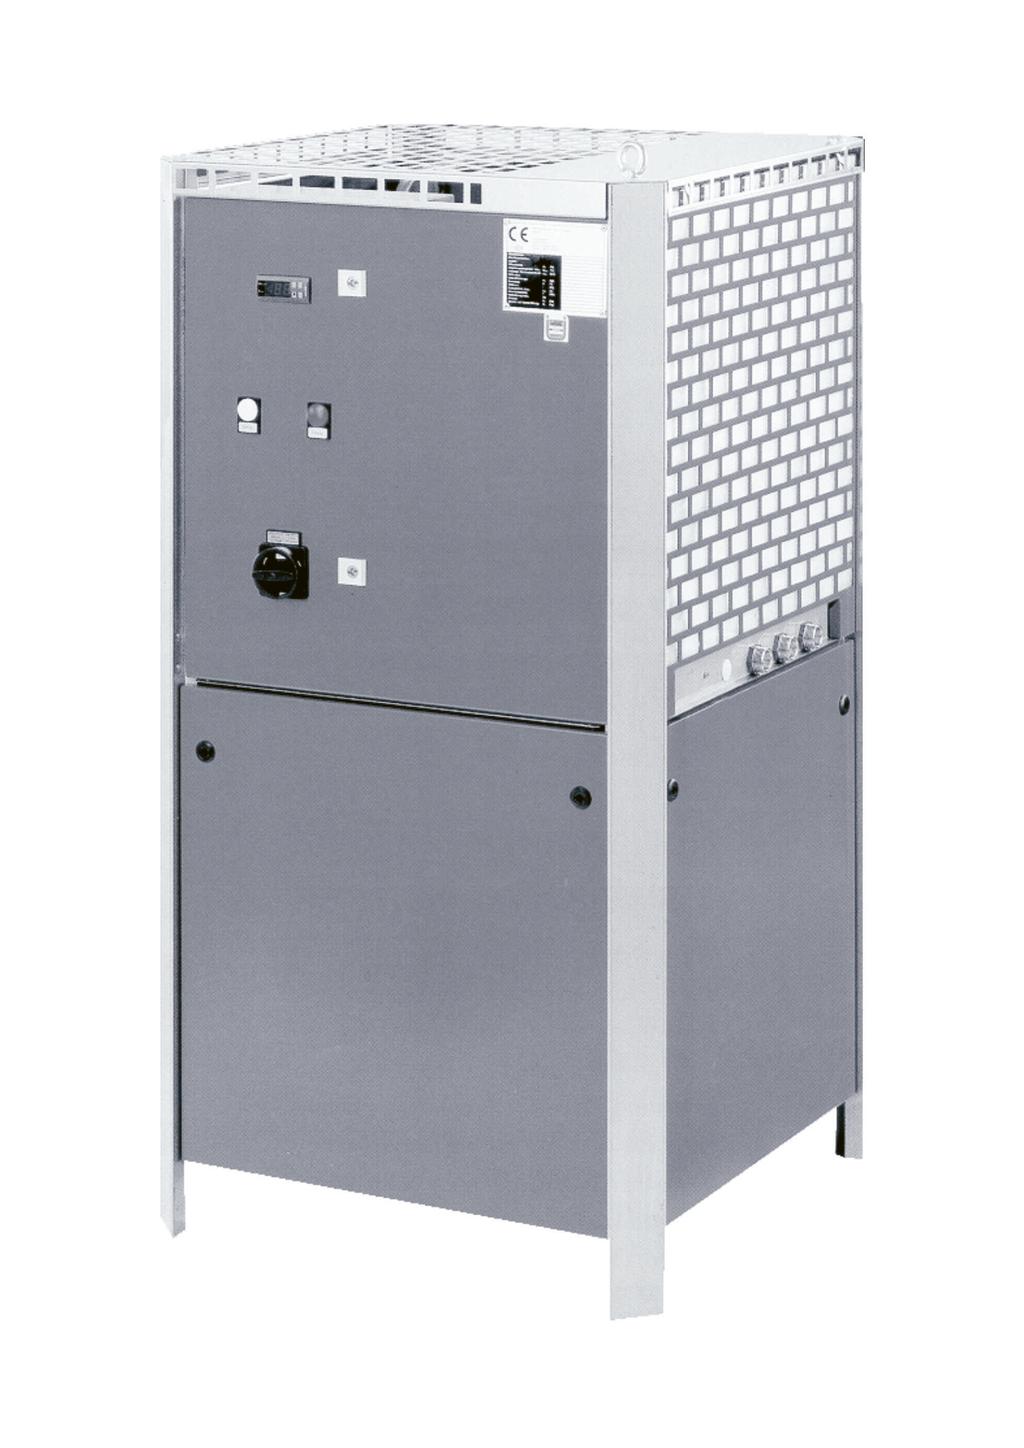 Chillers GMN high frequency spindles utilize the most powerful motors available for their size.